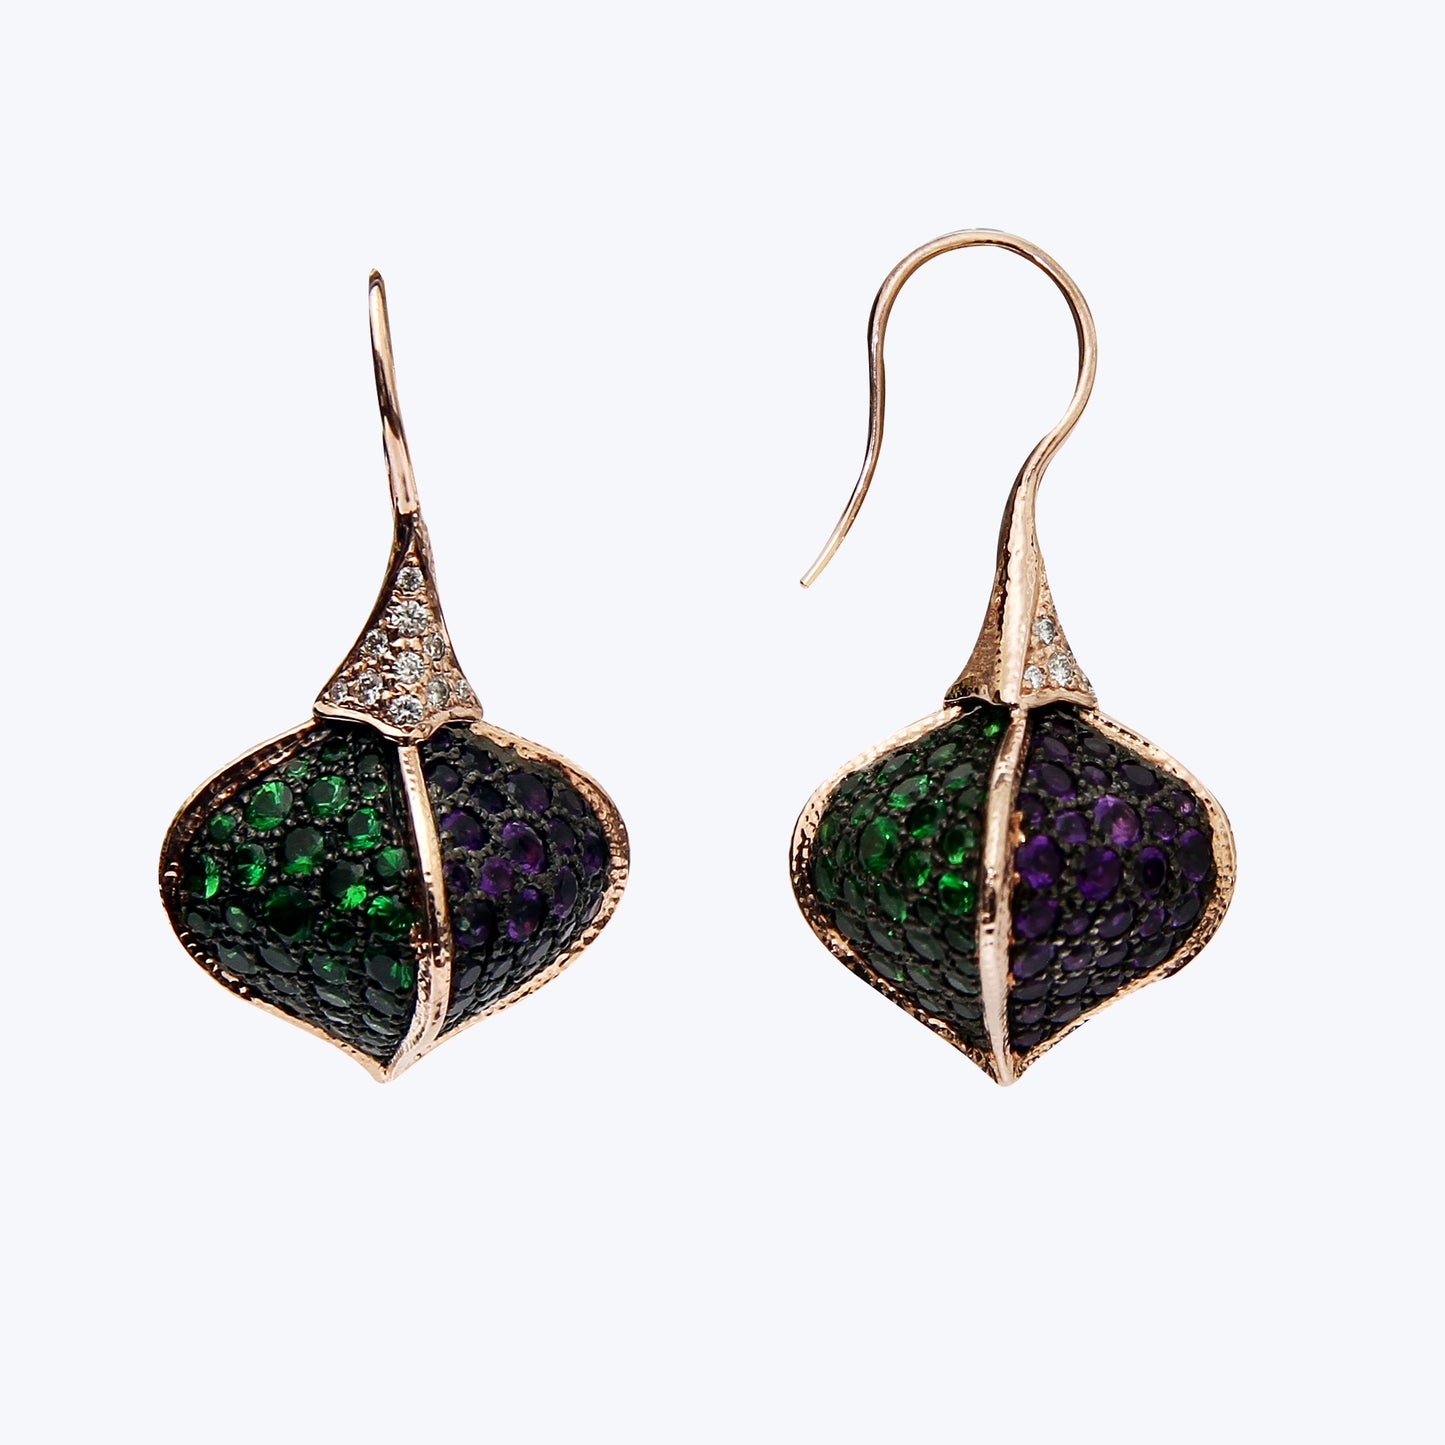 Balinese Fruit Earrings with Tsavorite and Amthyst